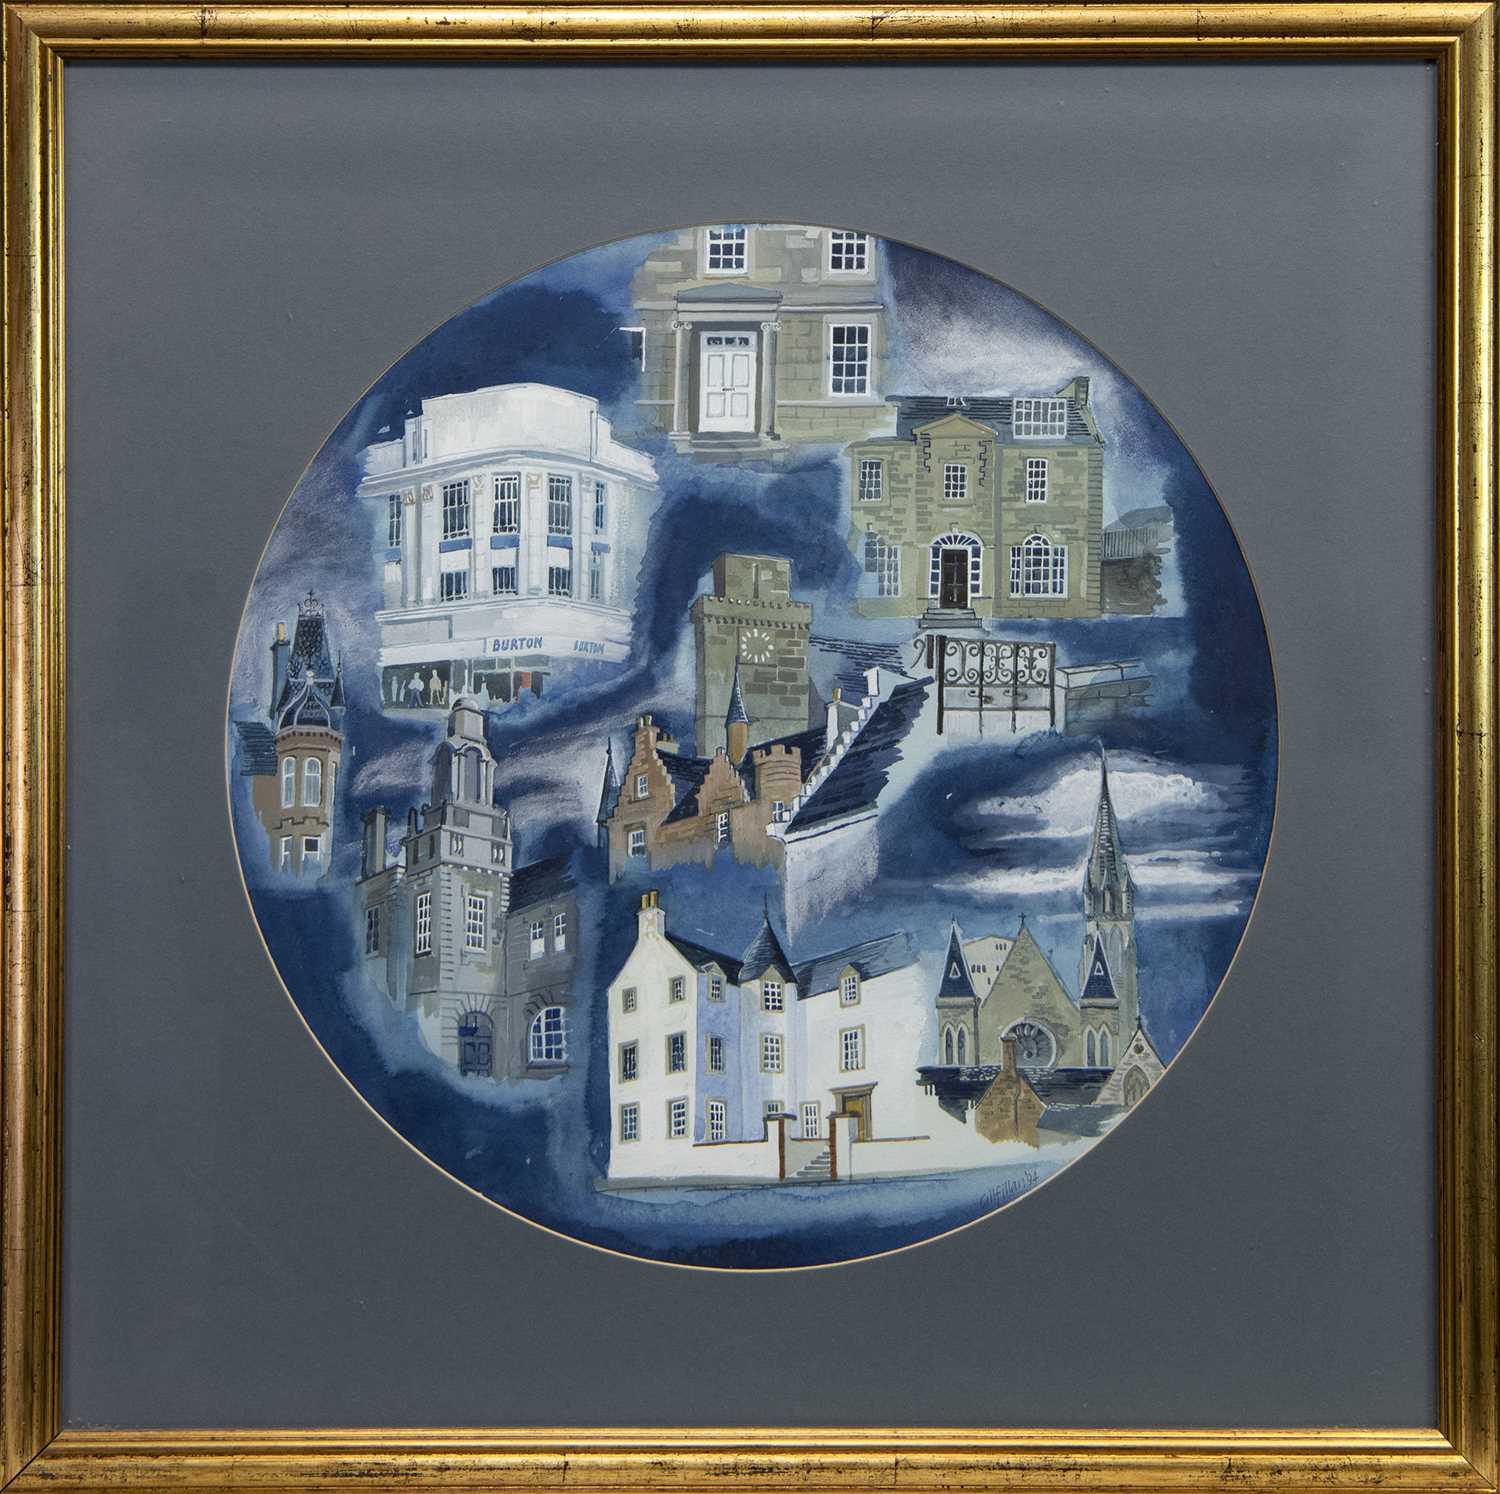 Lot 513 - KIRKCALDY IN THE ROUND, A WATERCOLOUR BY DUNCAN GILFILLAN